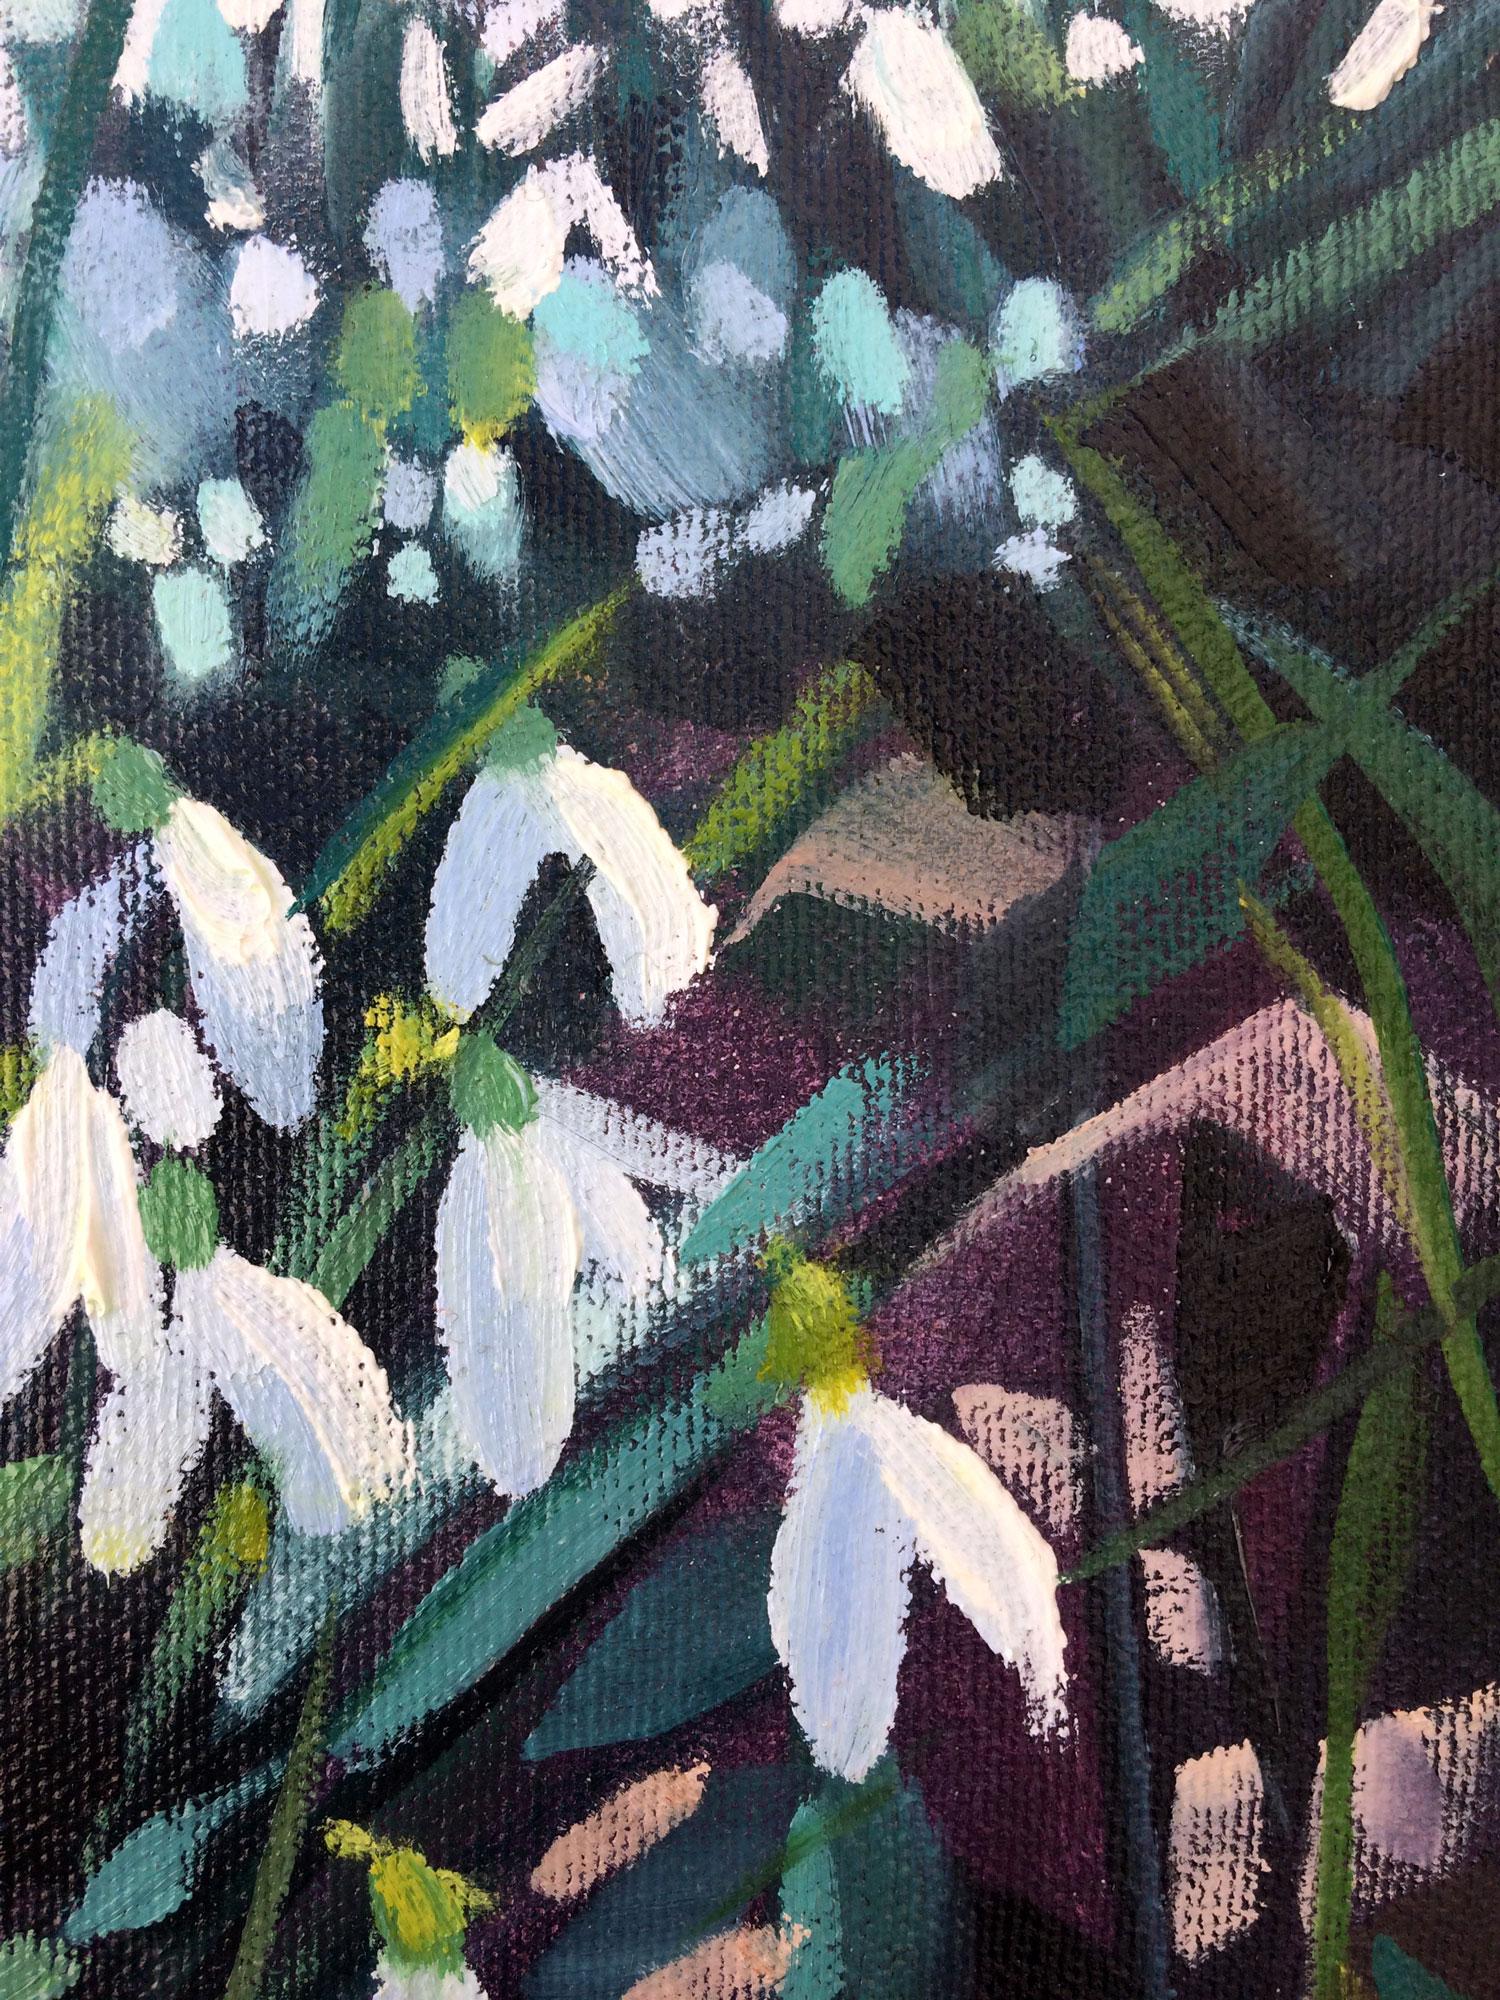 Rachel Painter
Snowdrop Valley II
Original Landscape Painting
Oil On Canvas
Image Size: 40 x 30 x 2 cm
Sold Unframed
Free Shipping
Please note that in situ images are purely an indication of how a piece may look.

As the sun begins to fade in